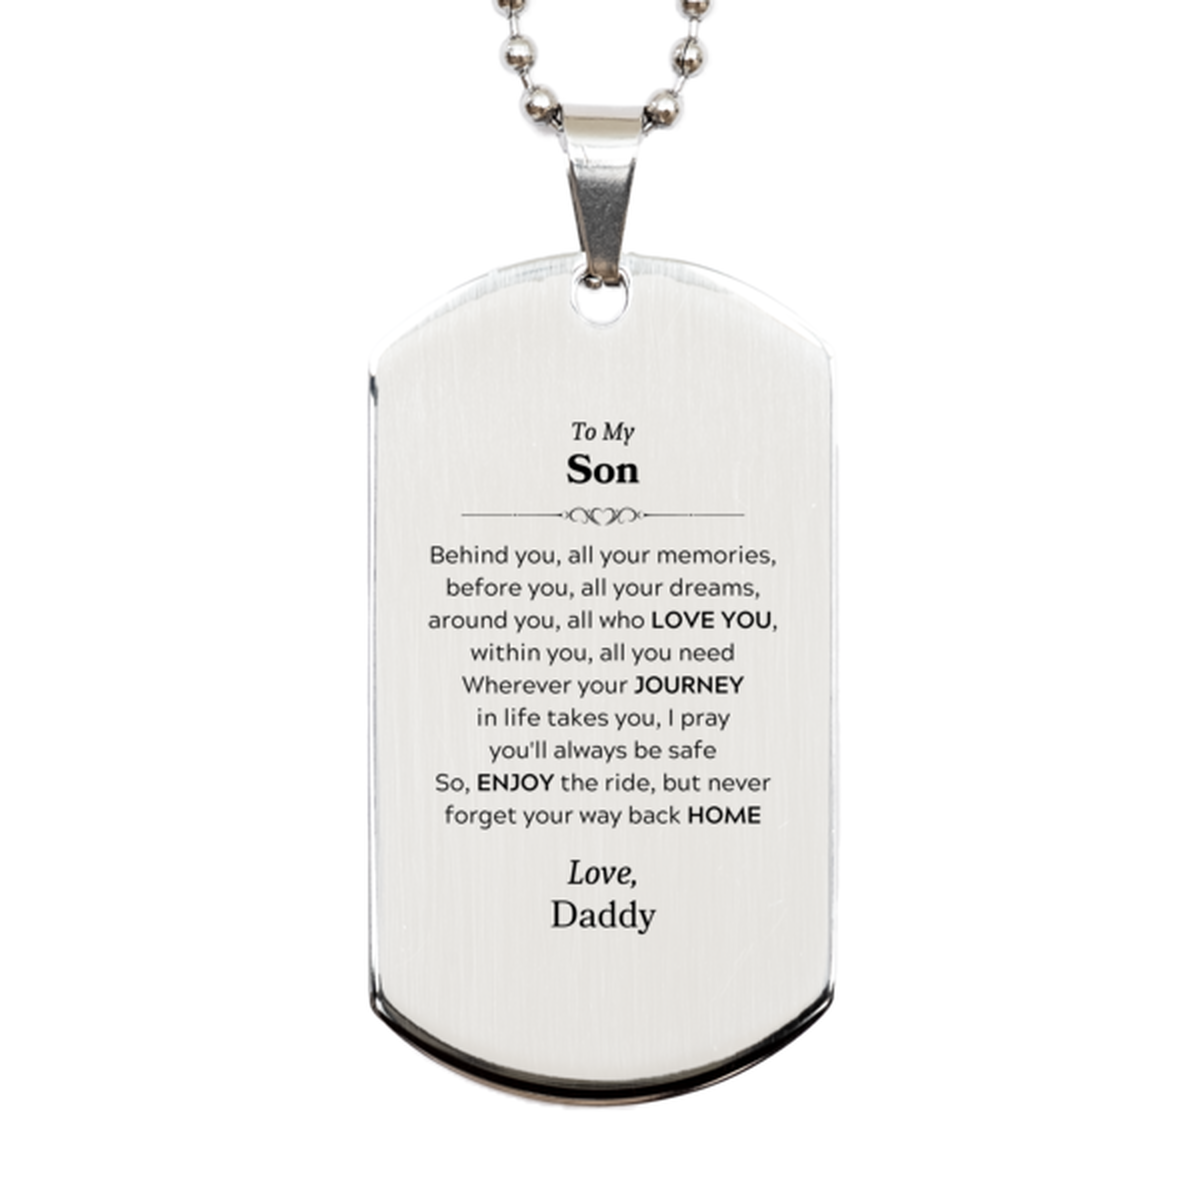 To My Son Graduation Gifts from Daddy, Son Silver Dog Tag Christmas Birthday Gifts for Son Behind you, all your memories, before you, all your dreams. Love, Daddy